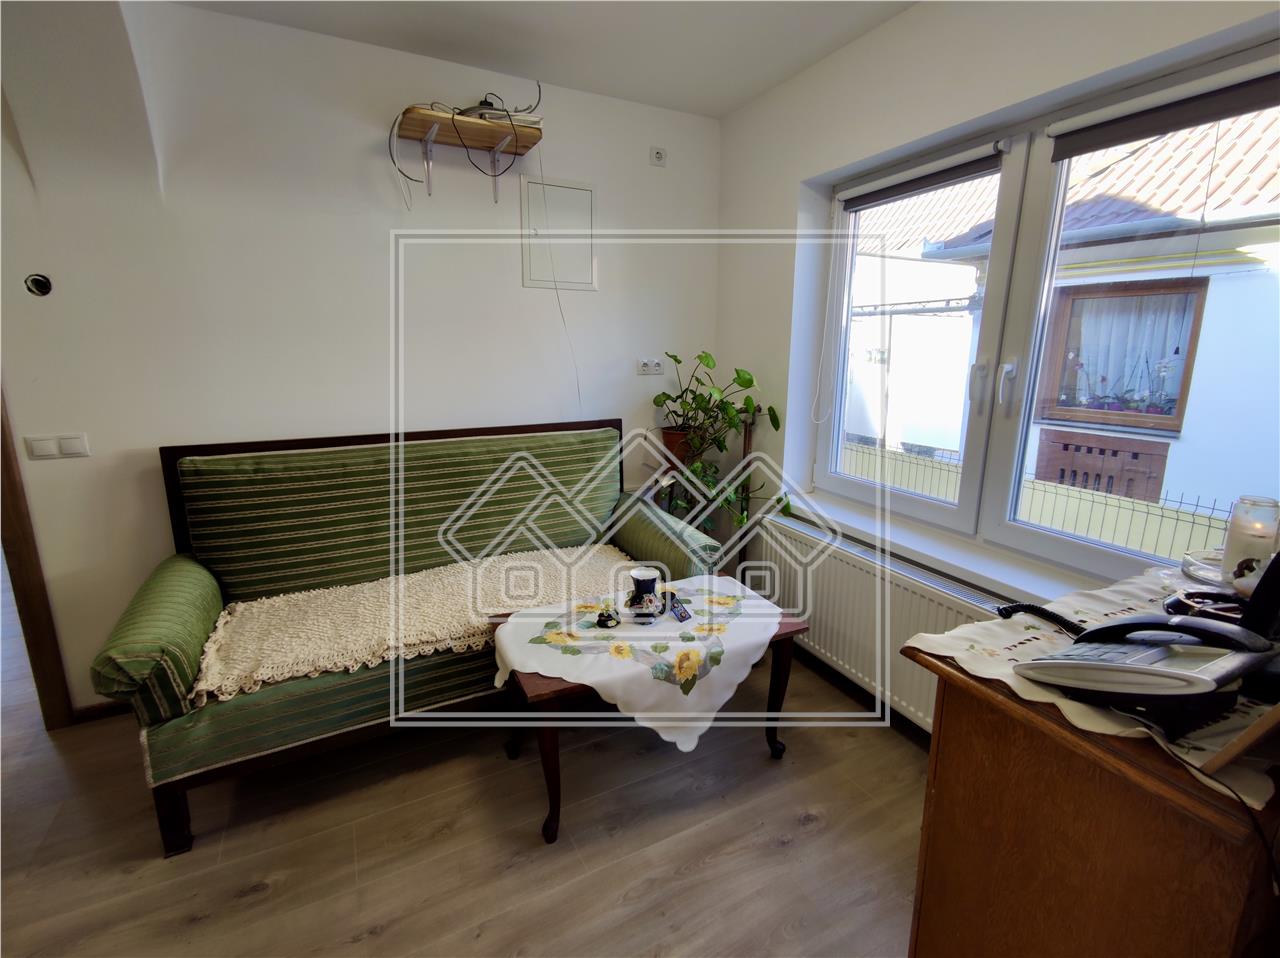 Office space for rent in Sibiu - Turnisor - Bieltz area + home and fre